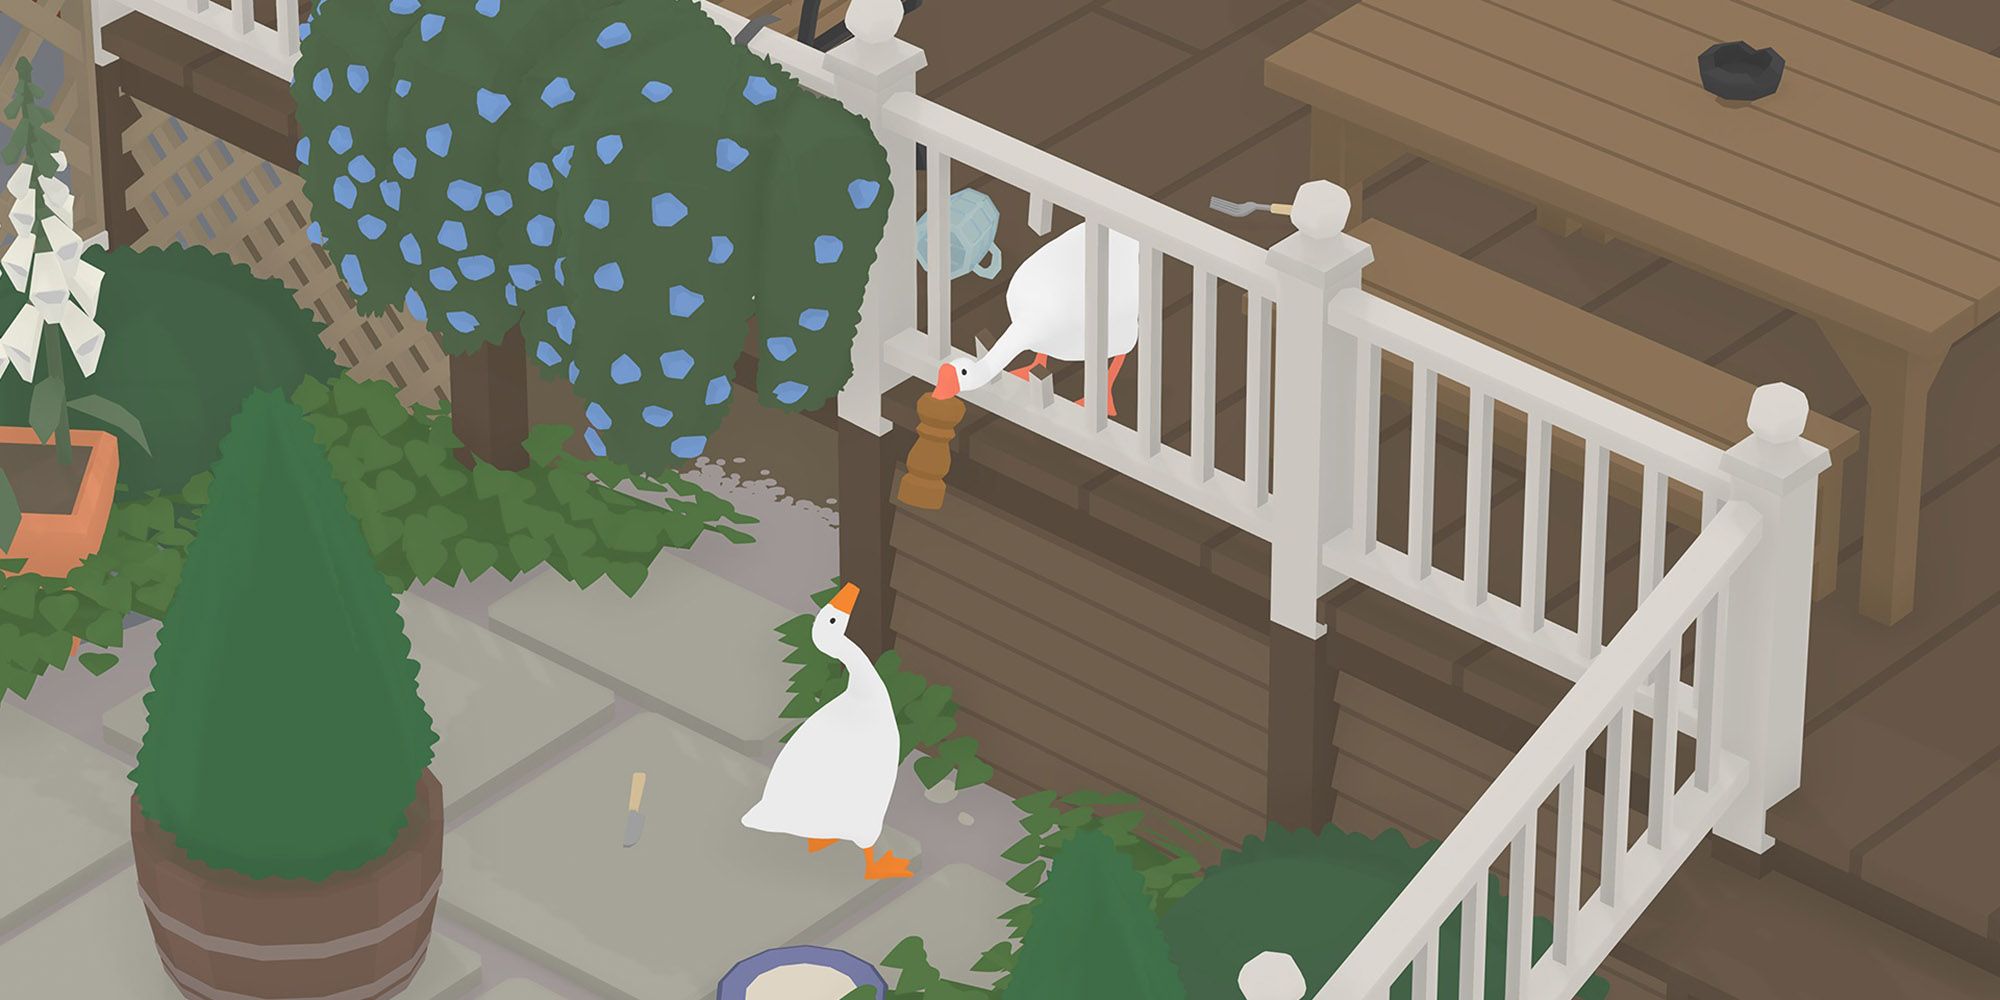 Untitled Goose Game Co-Op Review #gaming #gamereview #videogames